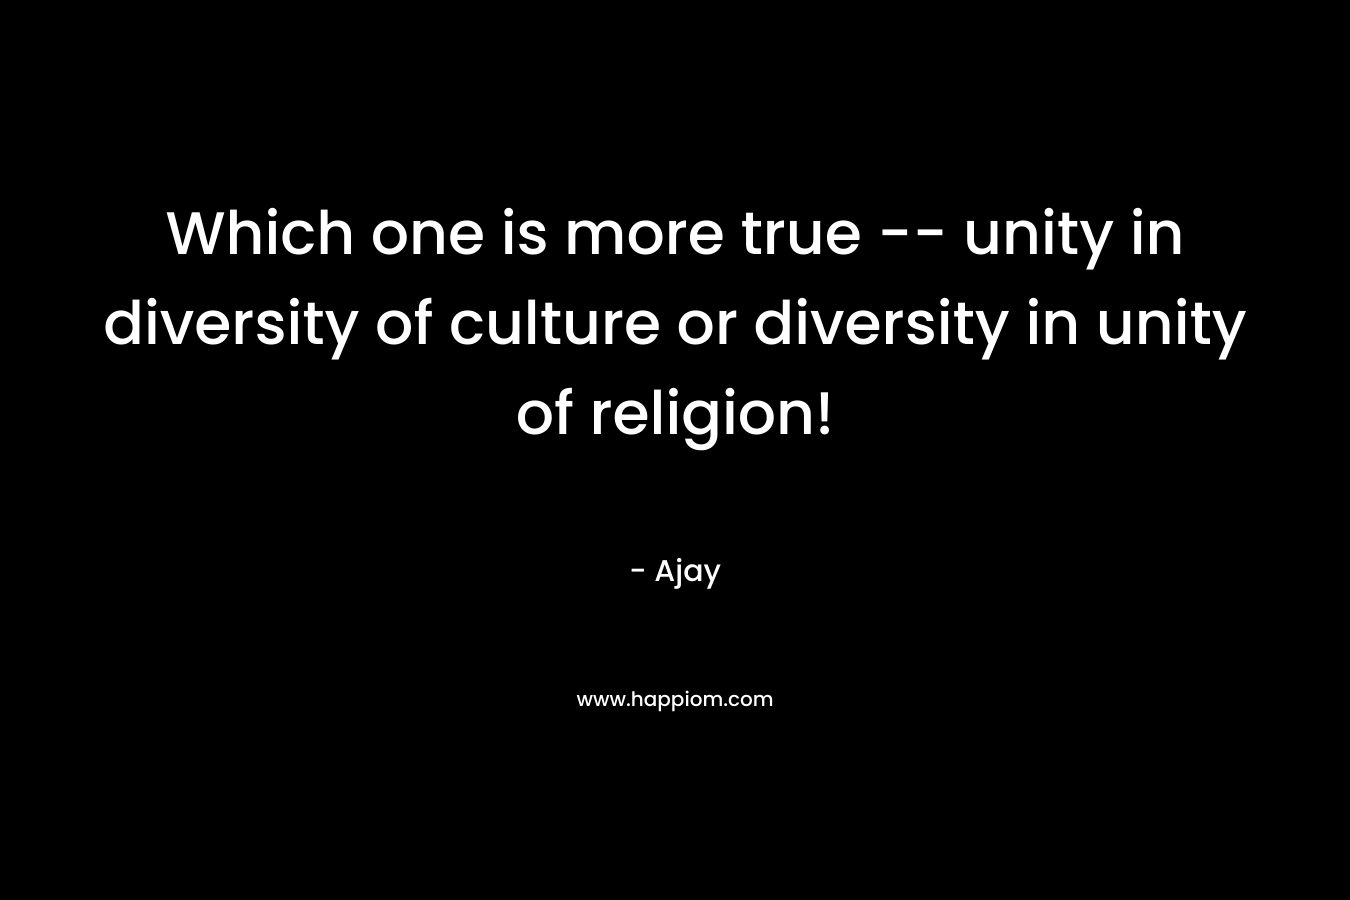 Which one is more true -- unity in diversity of culture or diversity in unity of religion!